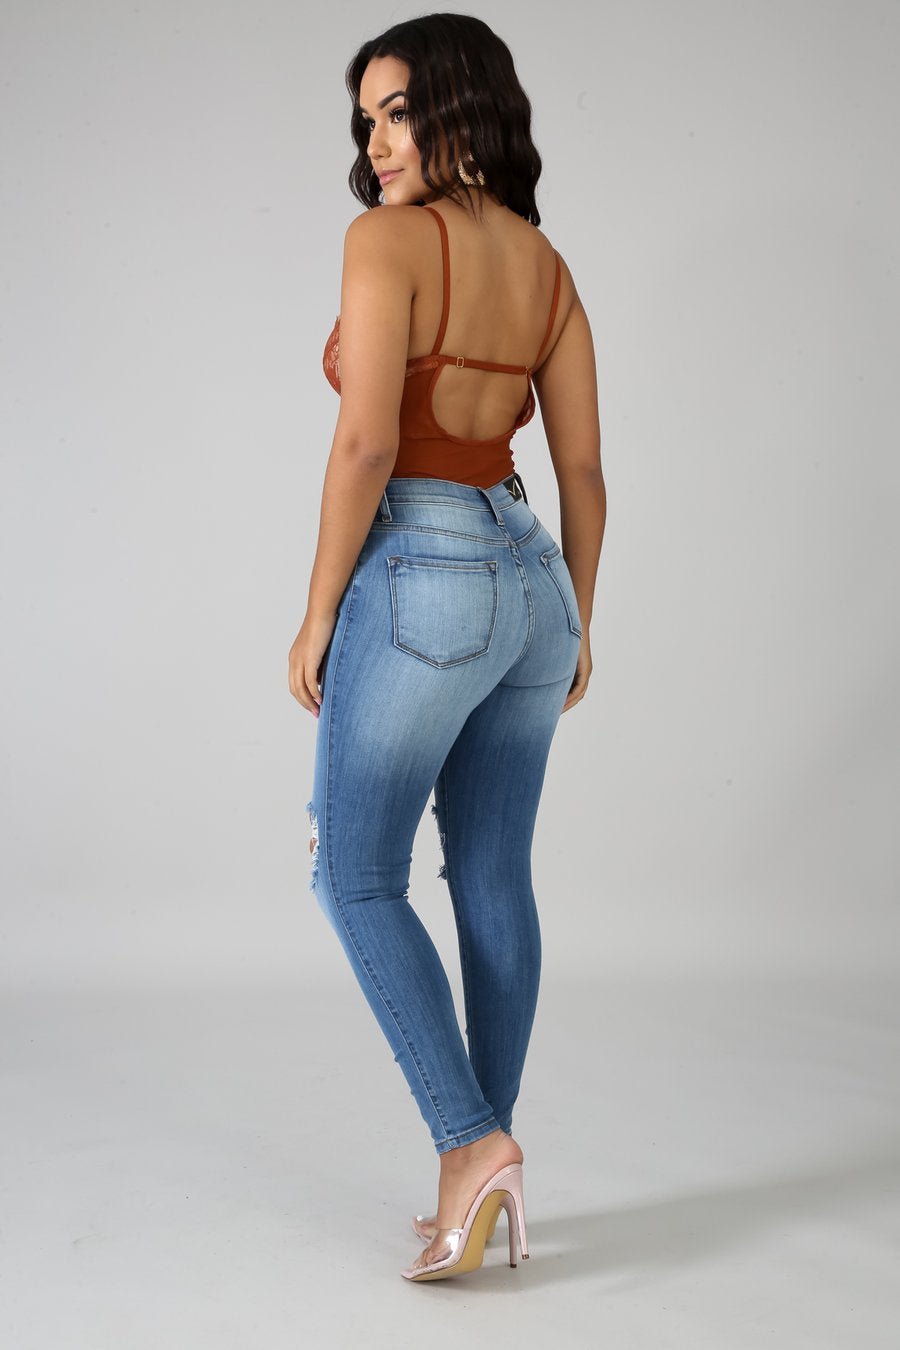 Must Have Distressed Skinny Jeans Medium Wash - Ali’s Couture 